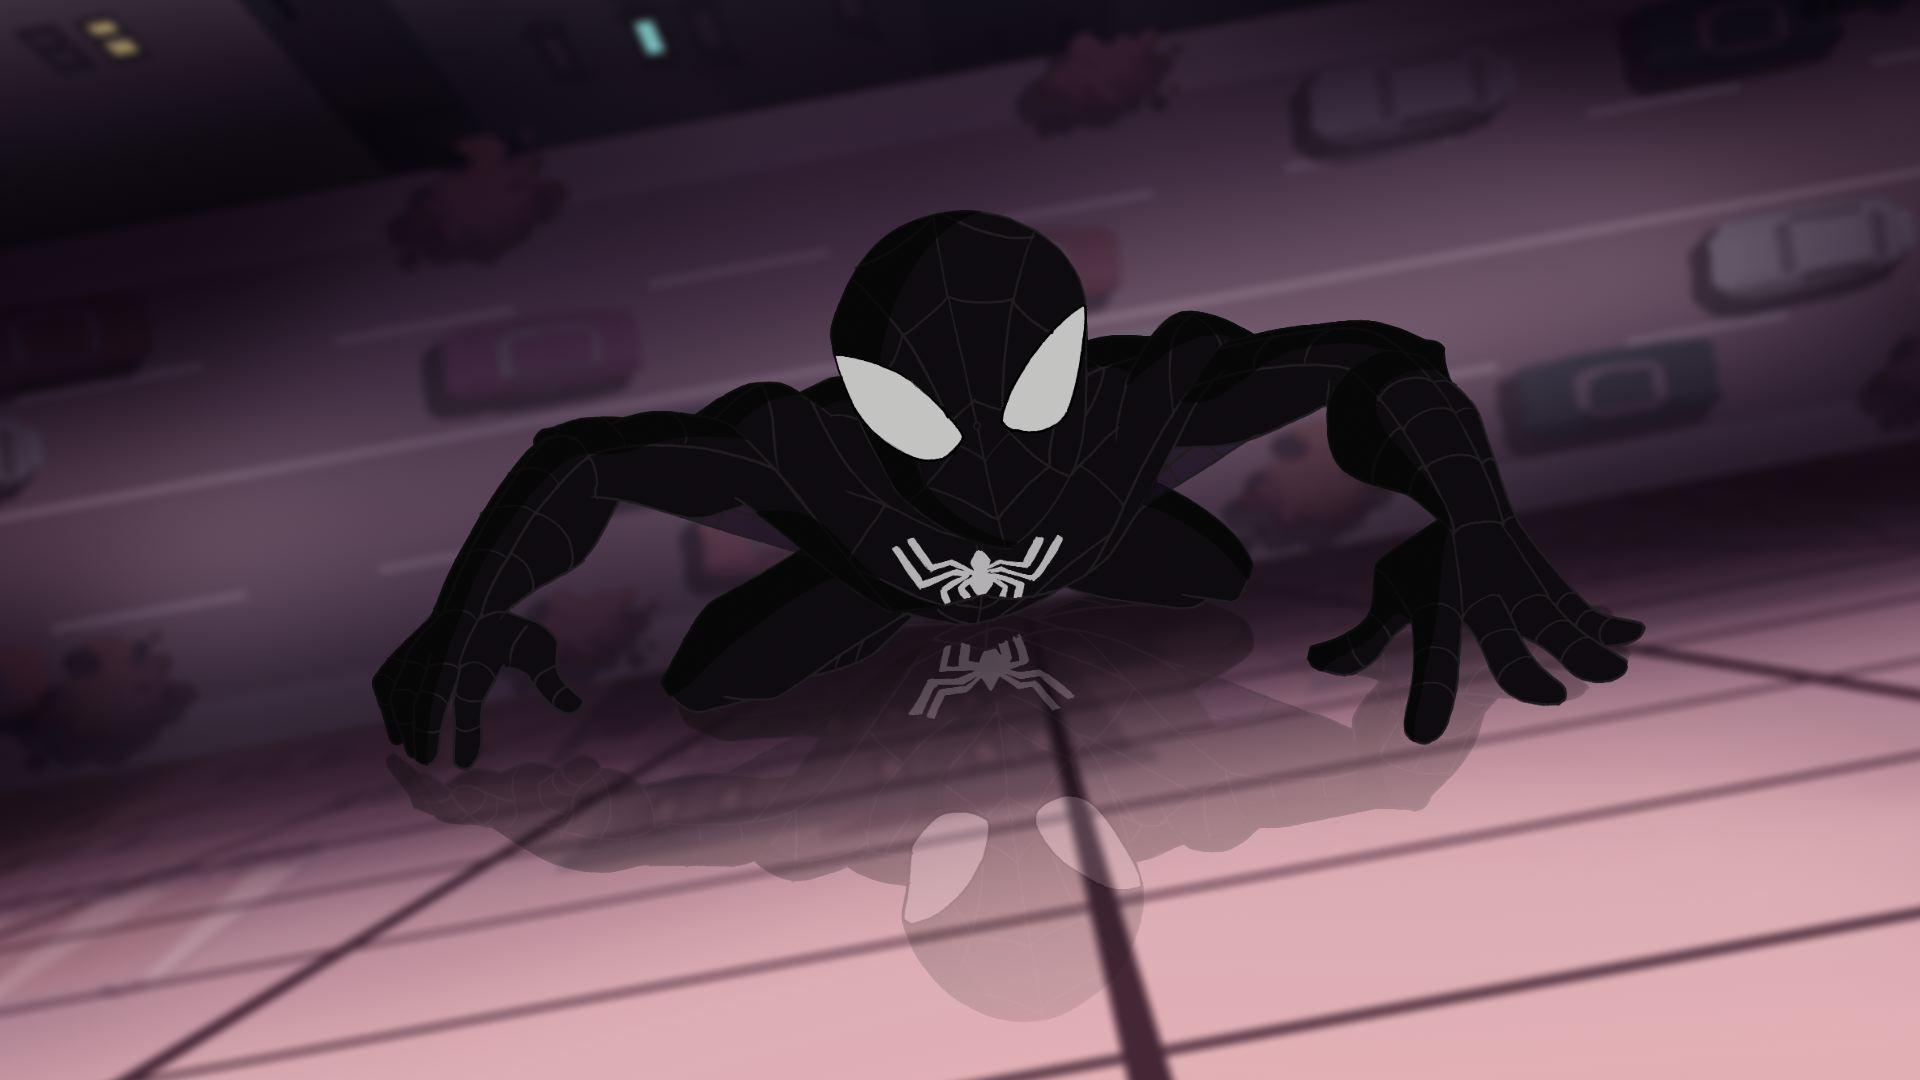 ...were released by Sony Entertainment and Marvel Animation to promote spec...